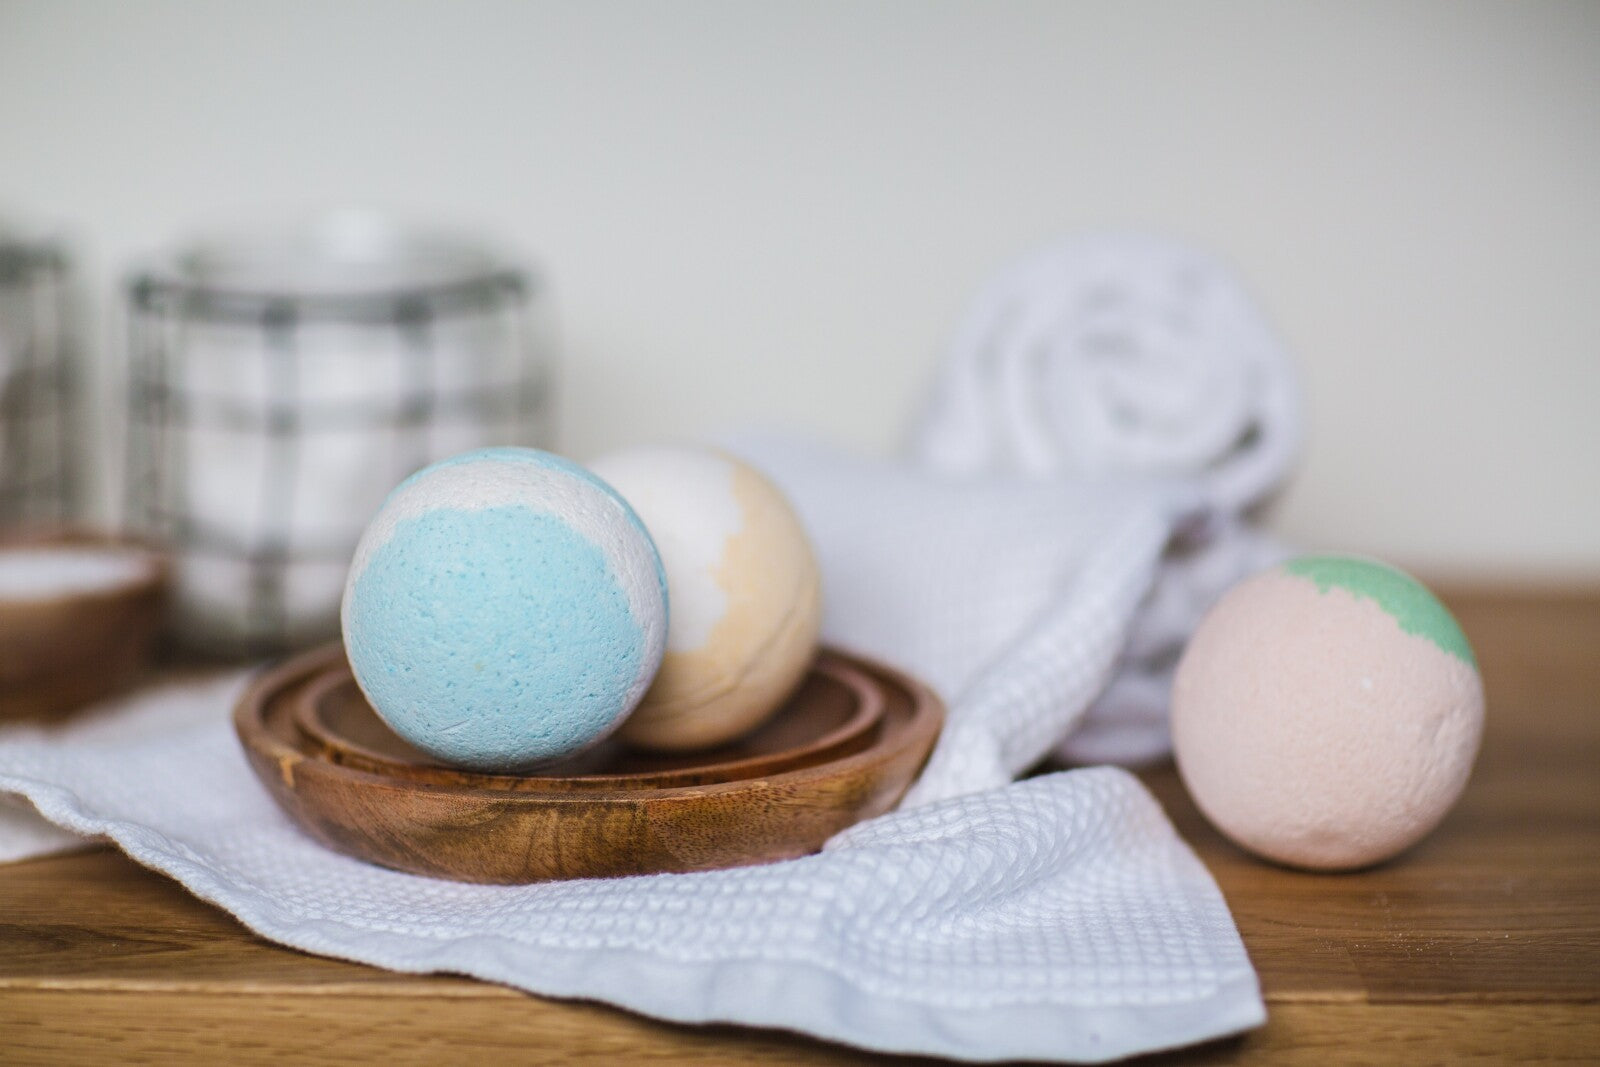 How To Make Bath Bombs At Home (Infographic)